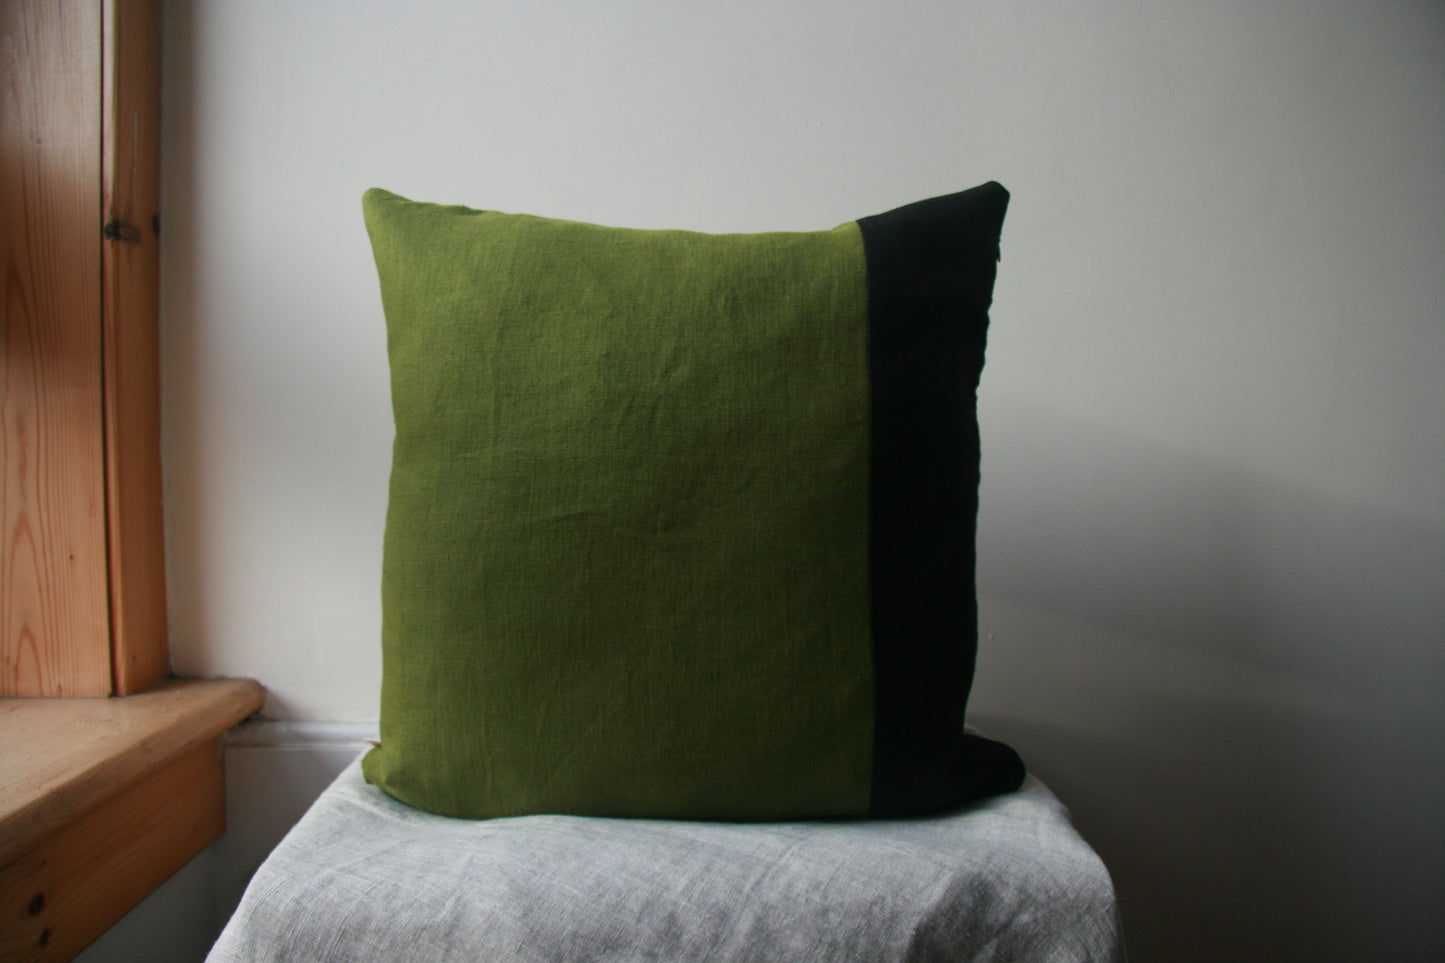 Square cushion cover, of which three quarters is green and one quarter is black. 